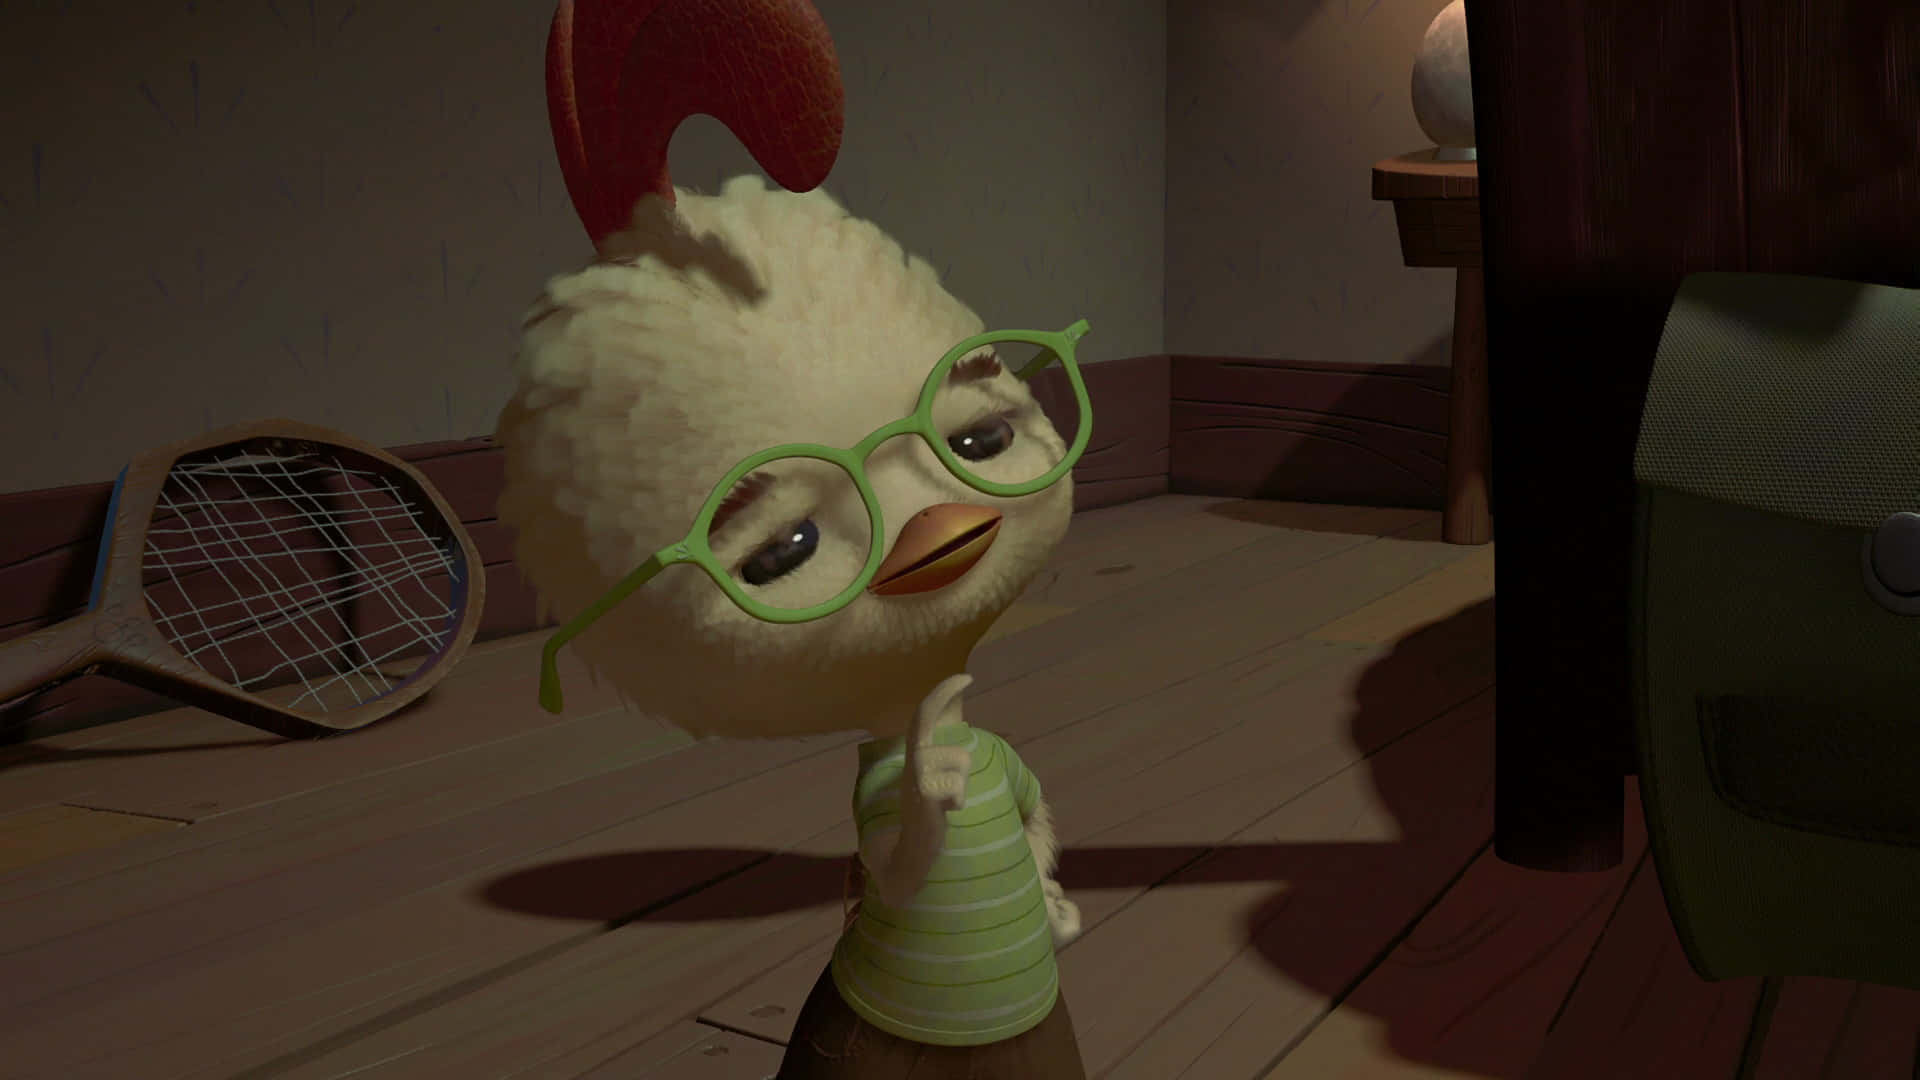 A Chicken In Glasses Is Standing In A Room